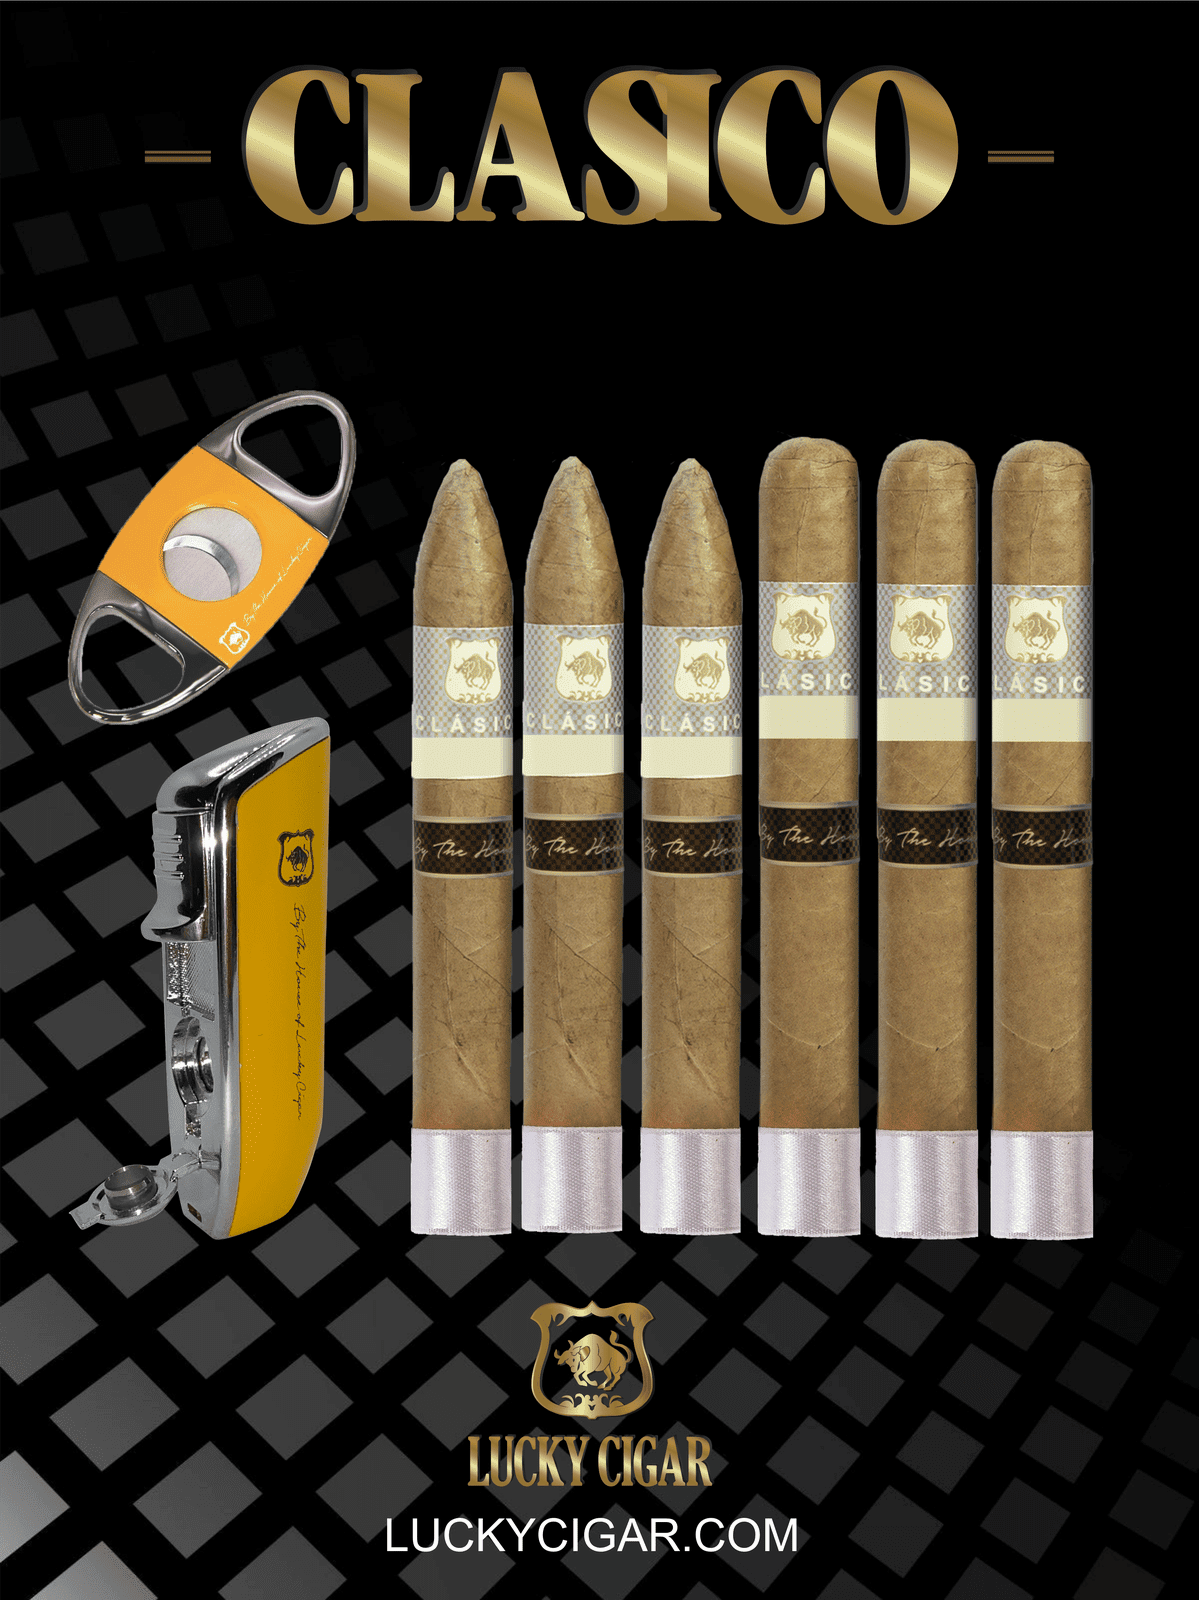 Classic Cigars - Classico by Lucky Cigar: Set of 6 Cigars, 3 Torpedo, 3 Churchill with Cutter, Torch